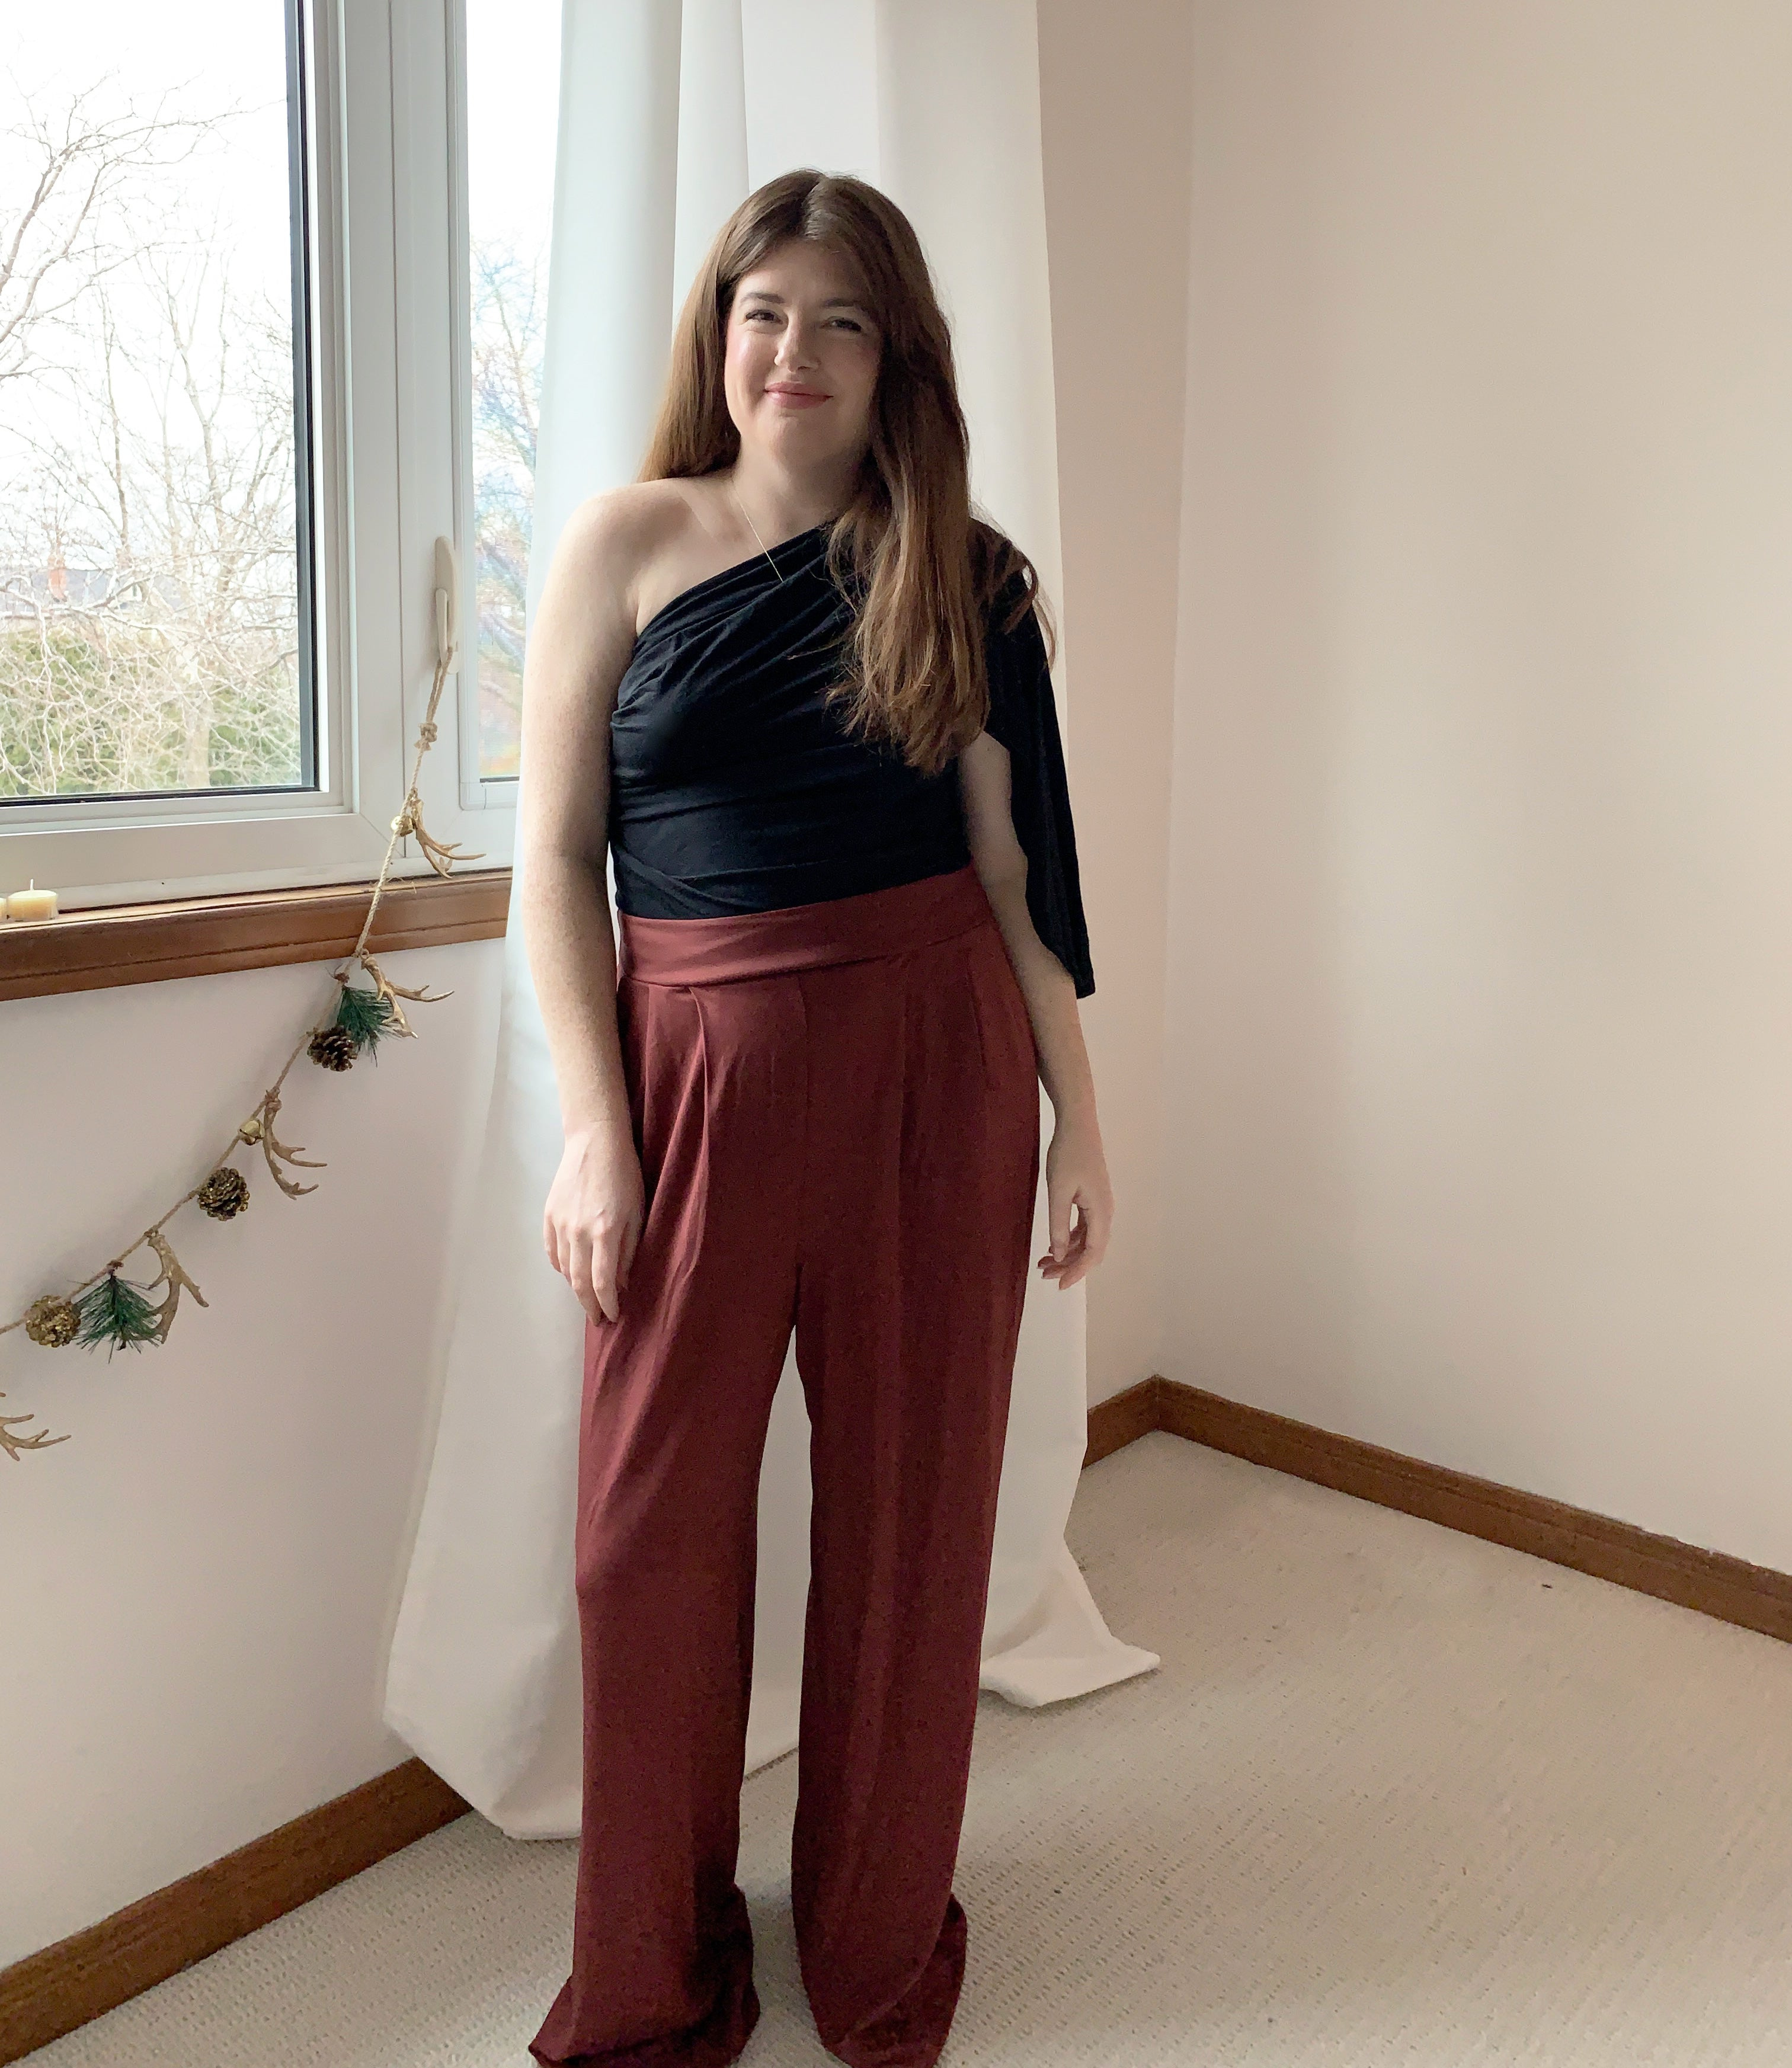 Three Chic and Comfortable Holiday Styles with Comfy Wide-Leg Pants